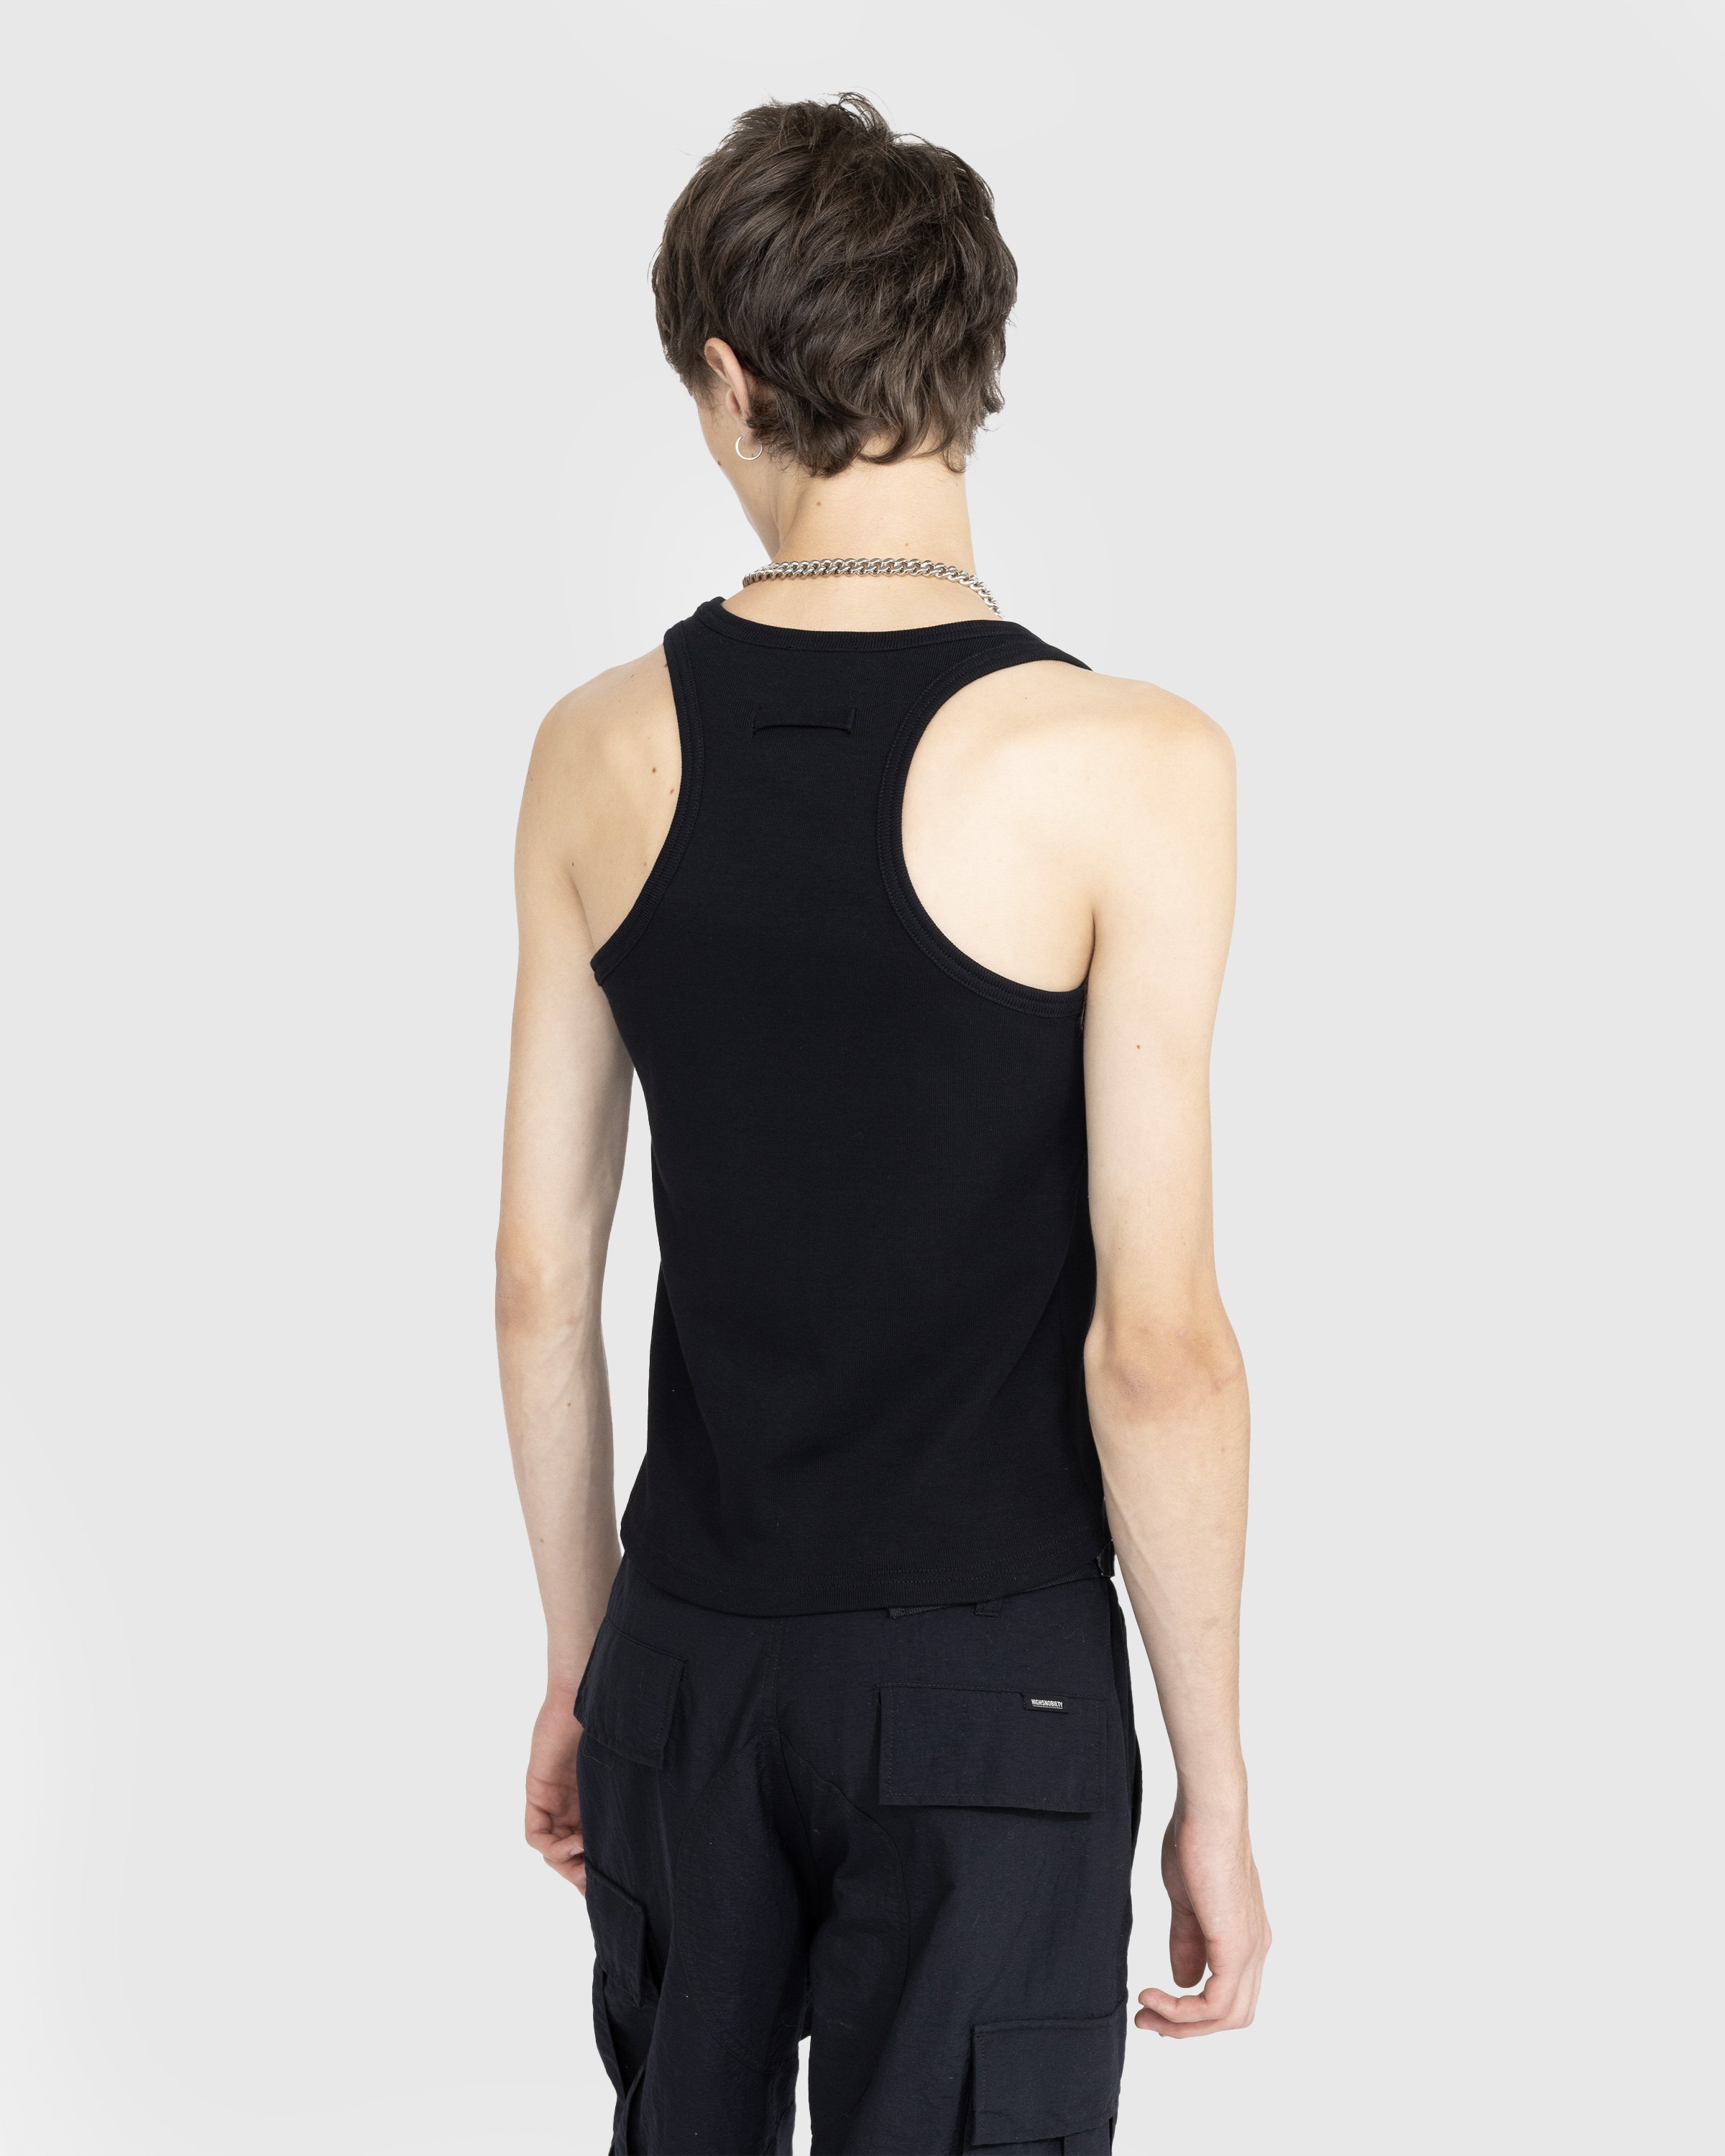 Jean Paul Gaultier - Laced Tank Top Black - Clothing - Black - Image 3